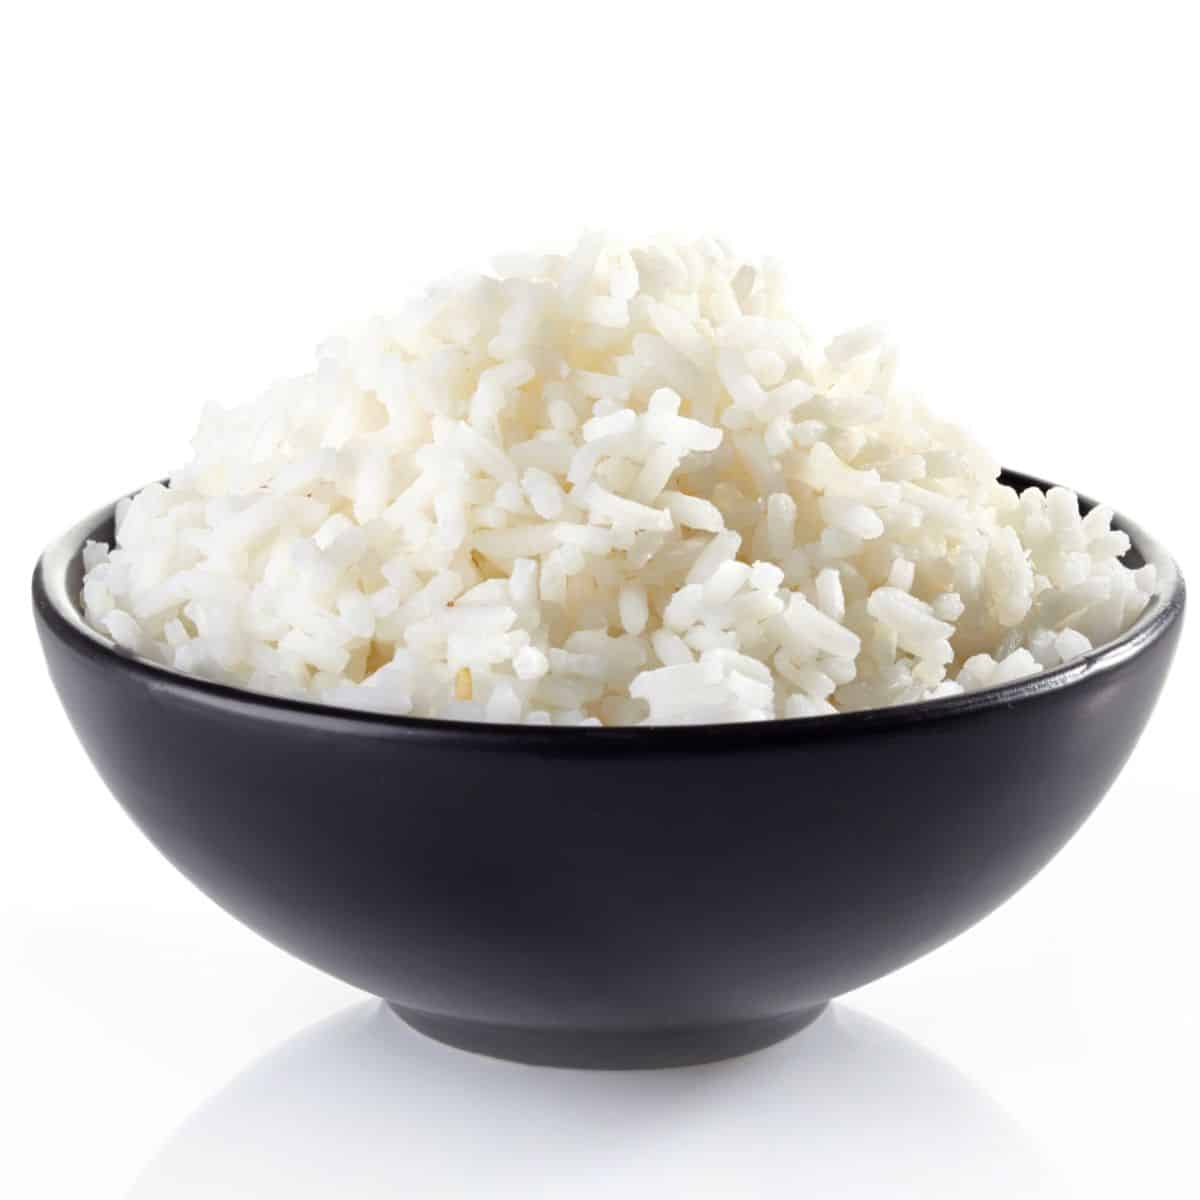 Sticky rice in a black bowl on a white background.